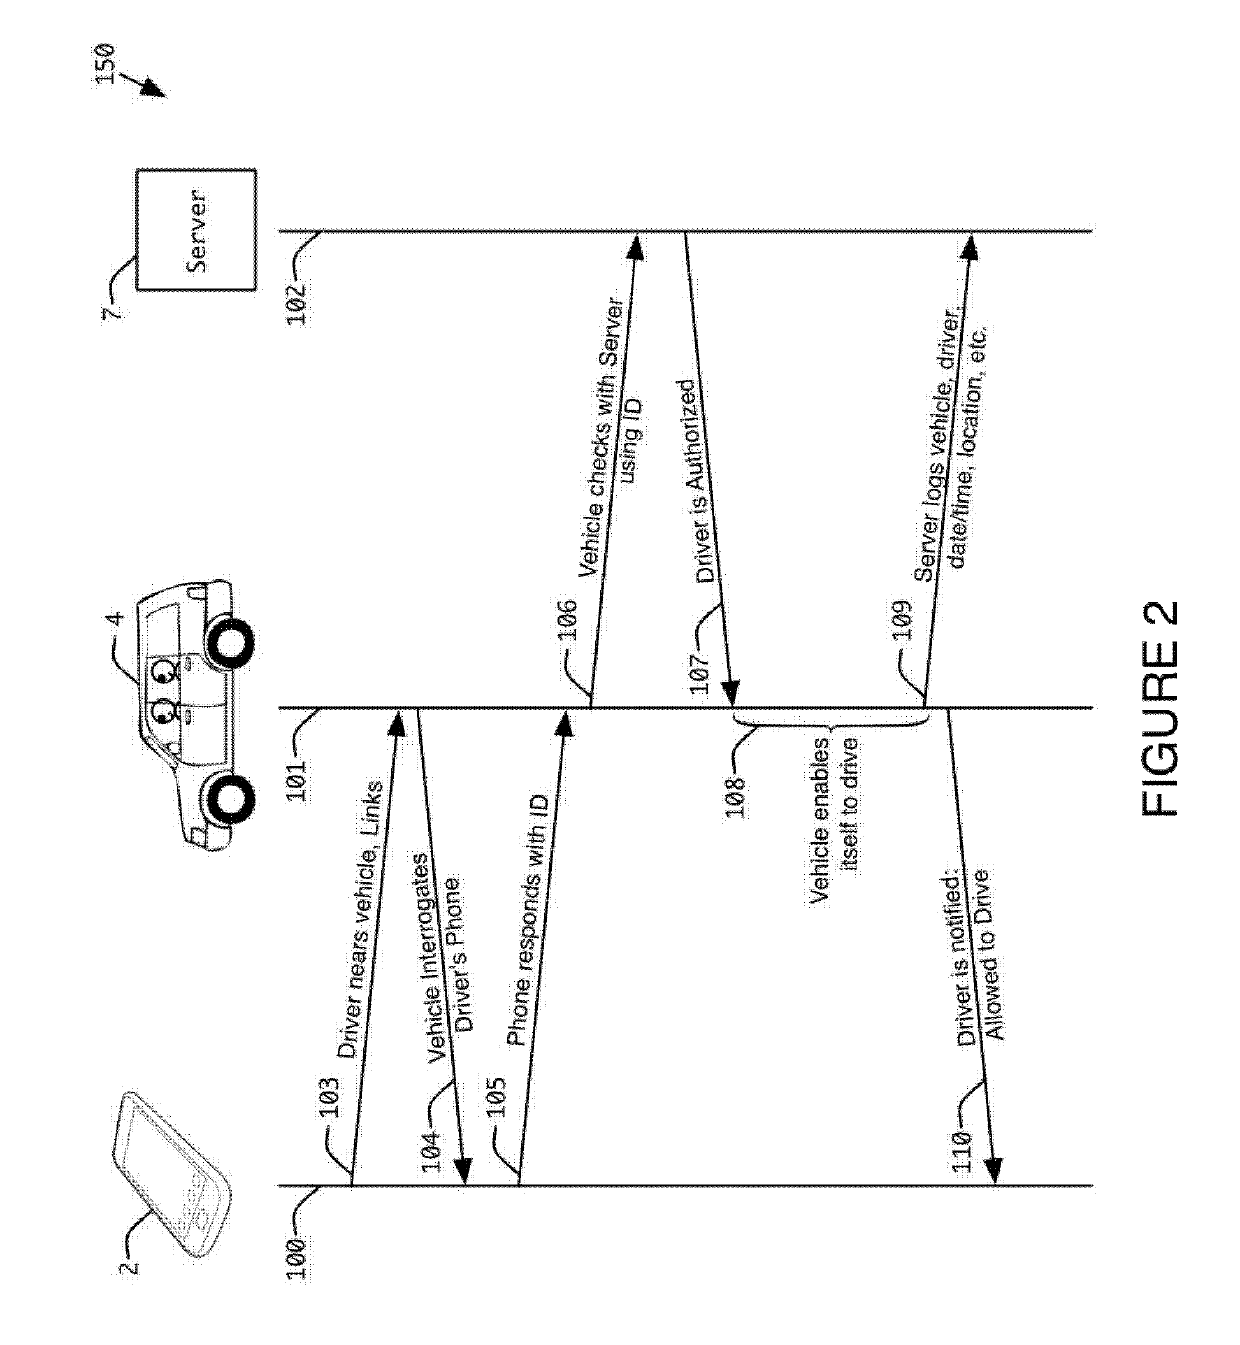 System and method for wirelessly rostering a vehicle